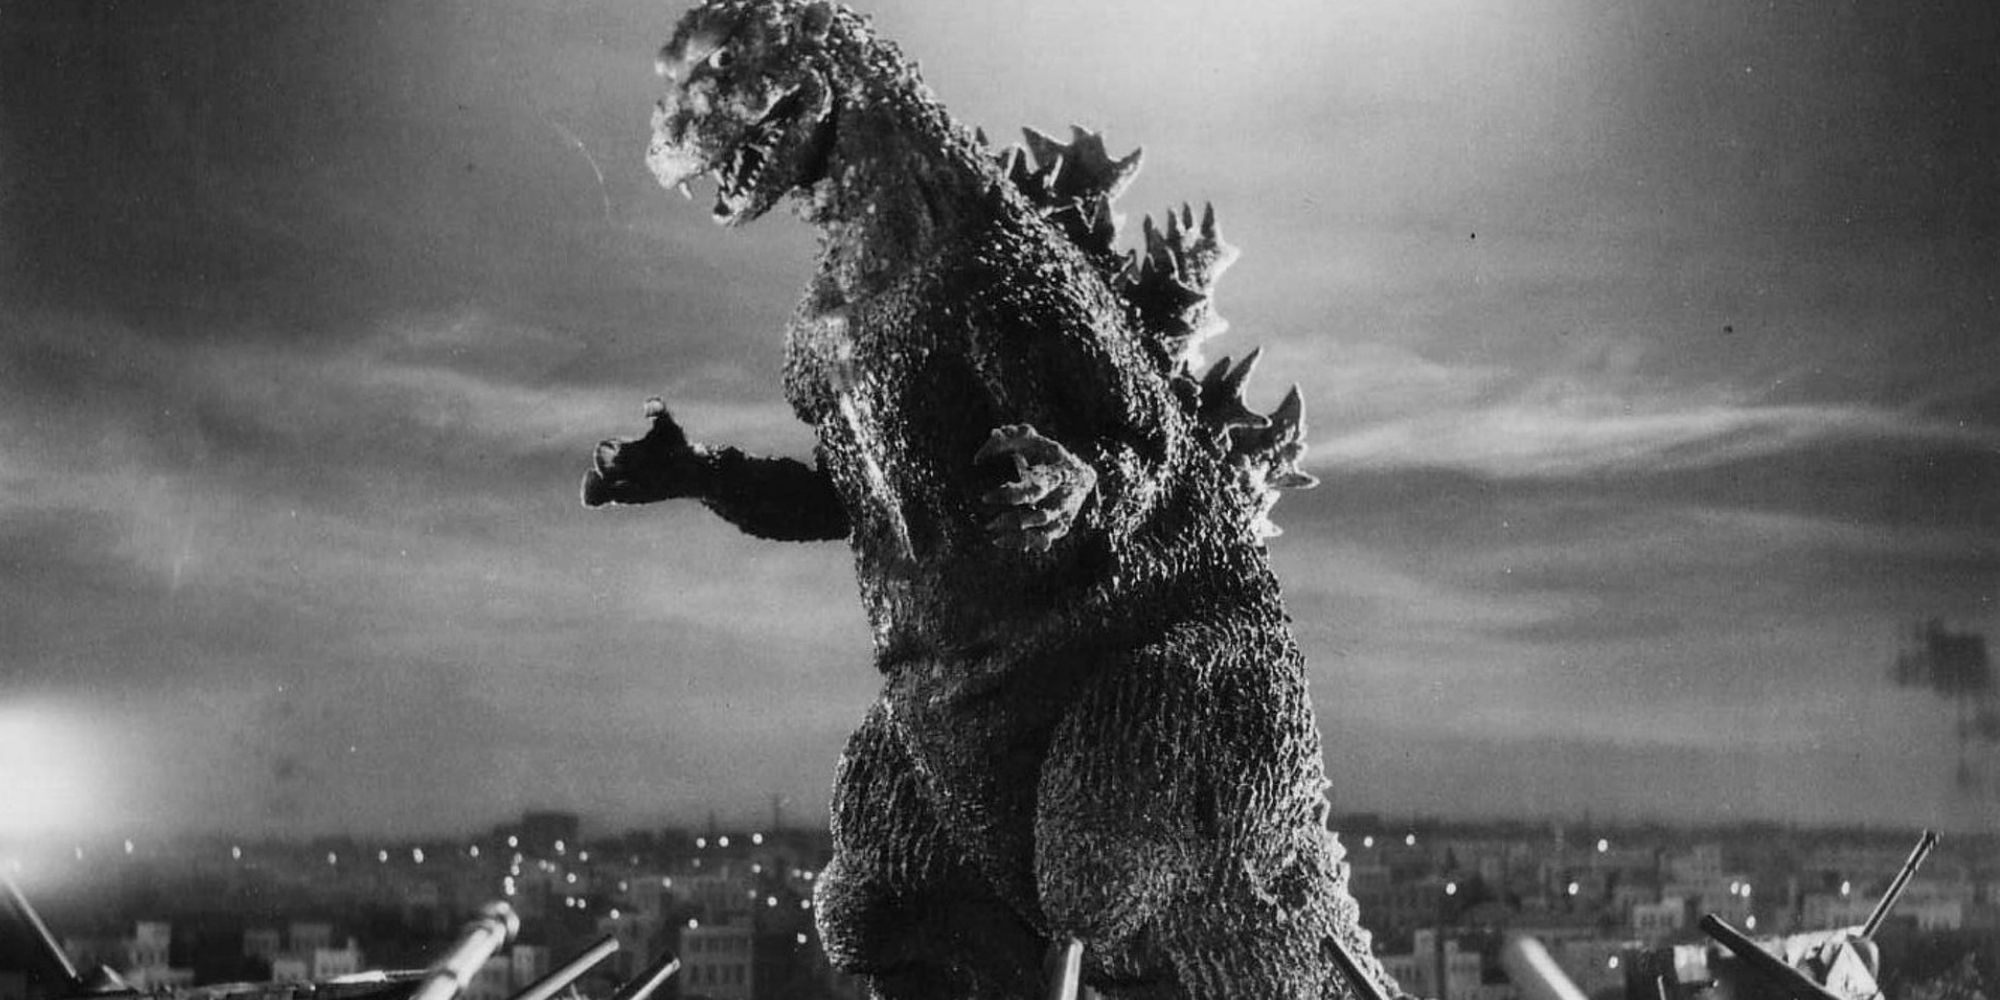 Godzilla as he appears in the 1954 film